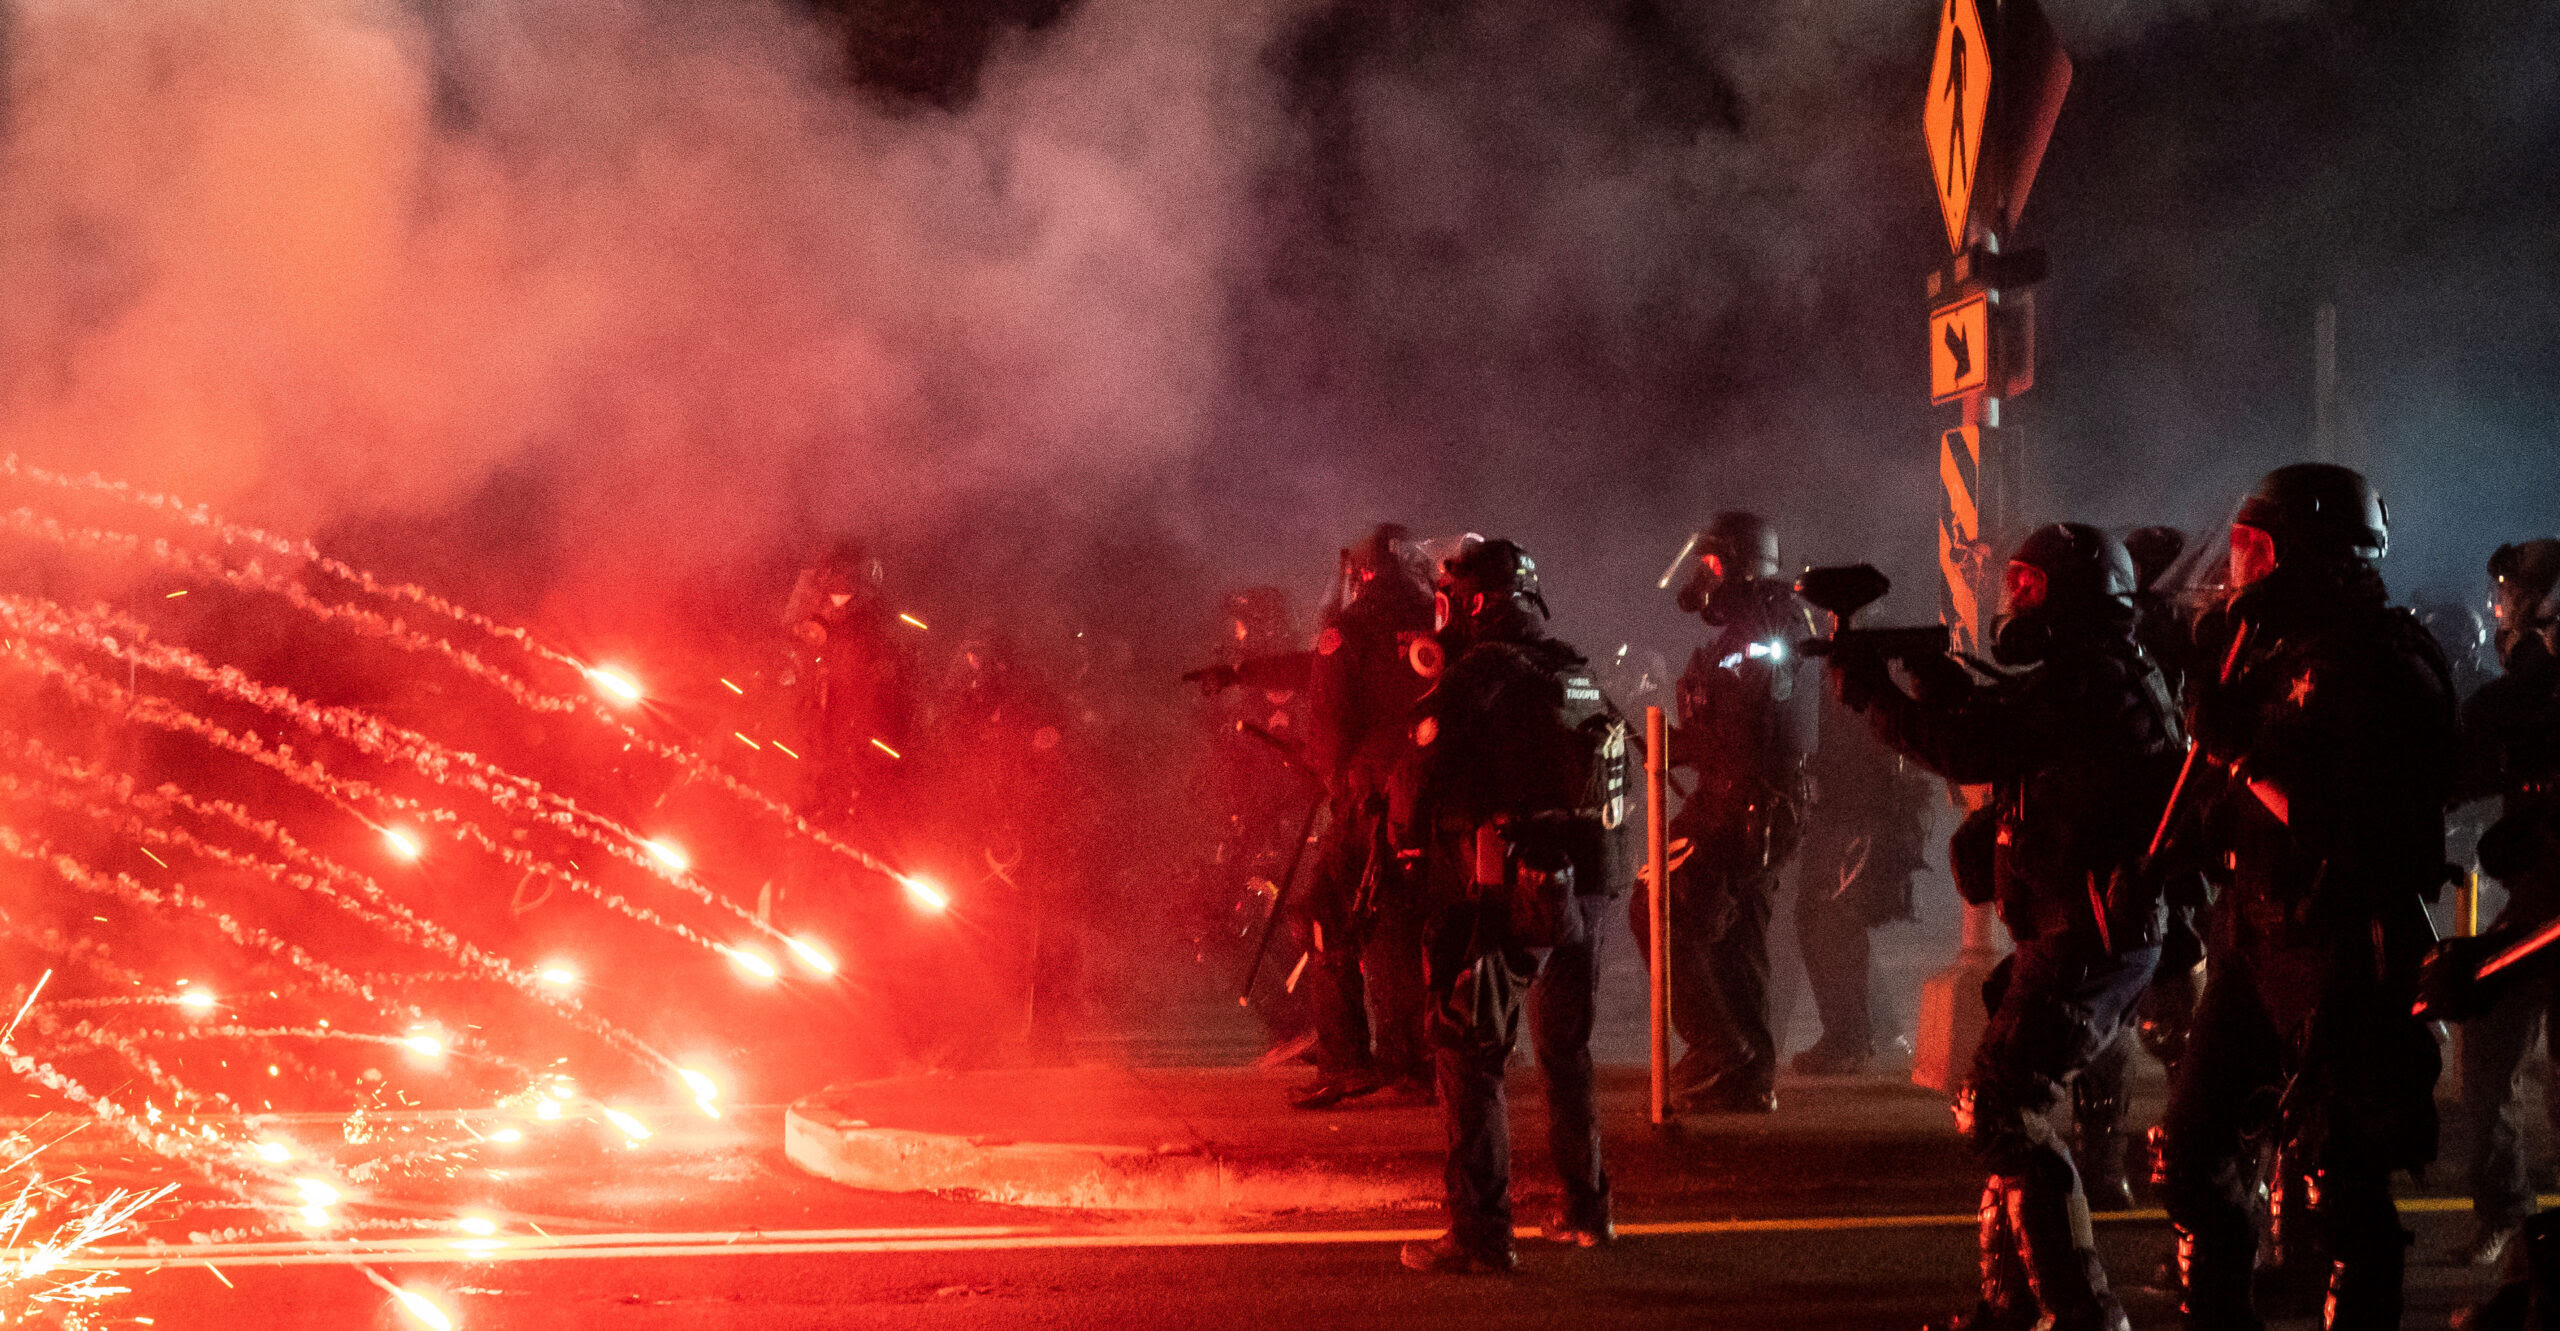 ICYMI: ‘Spontaneous’ Street Violence Is Well Organized, Pursuing a Radical Agenda